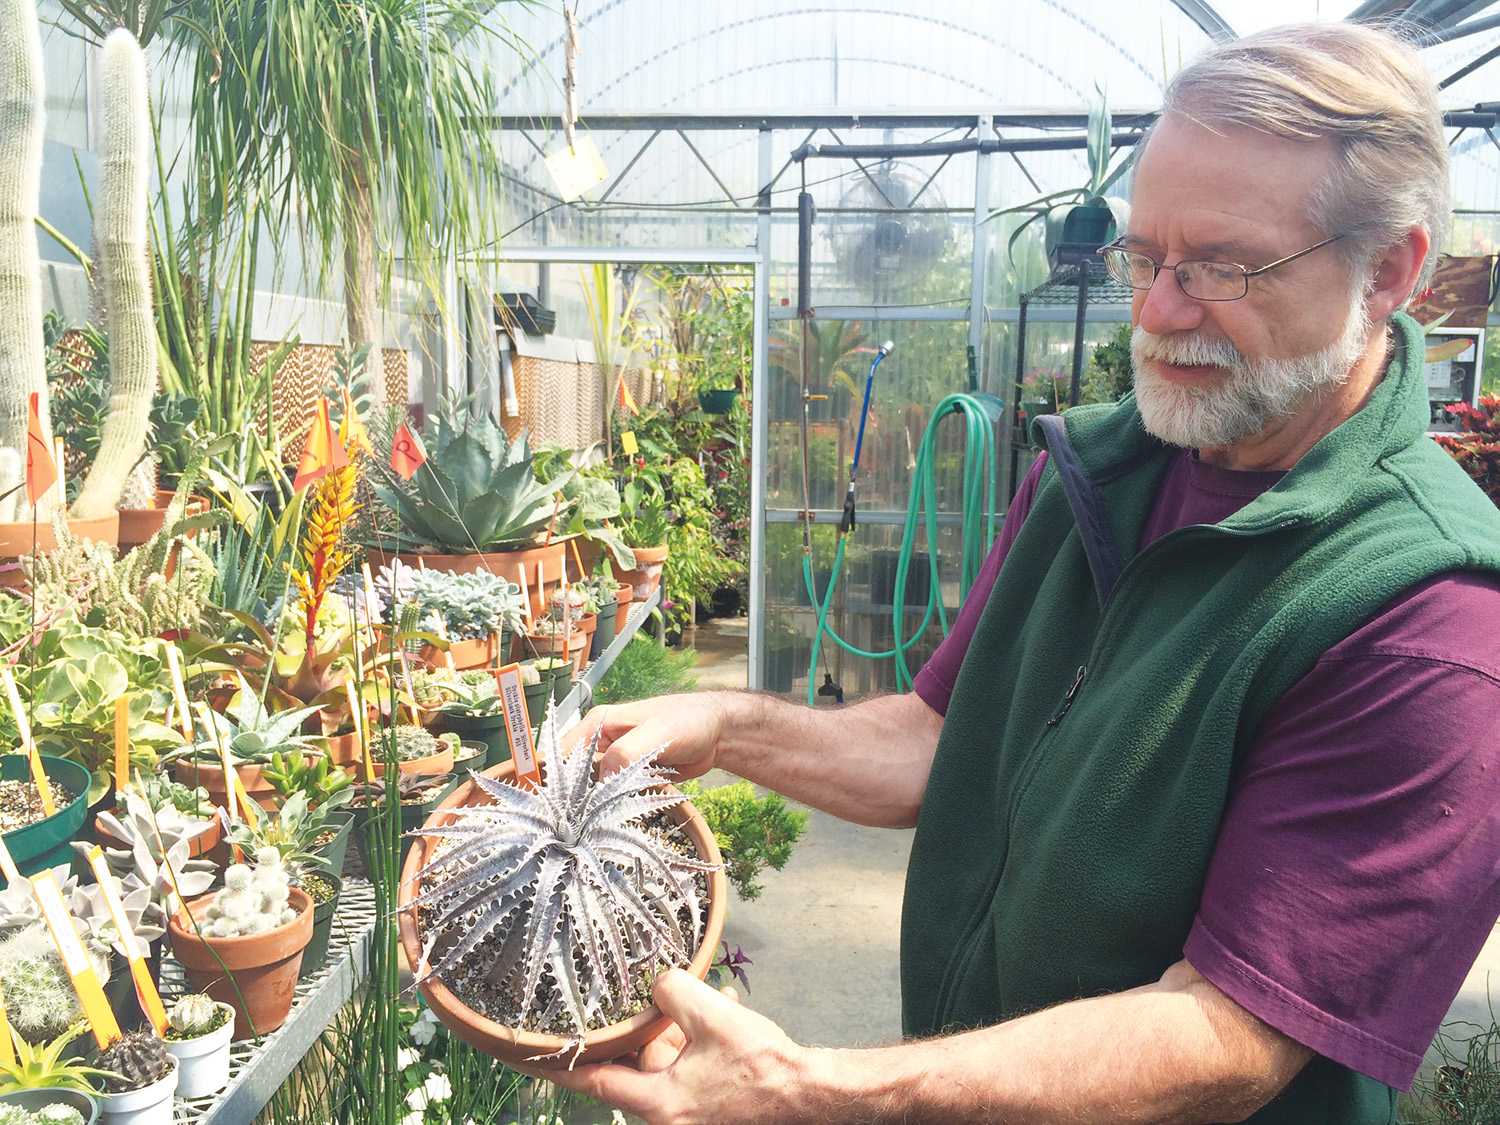 Working with the plants: Greenhouse prepares for fall plant sale